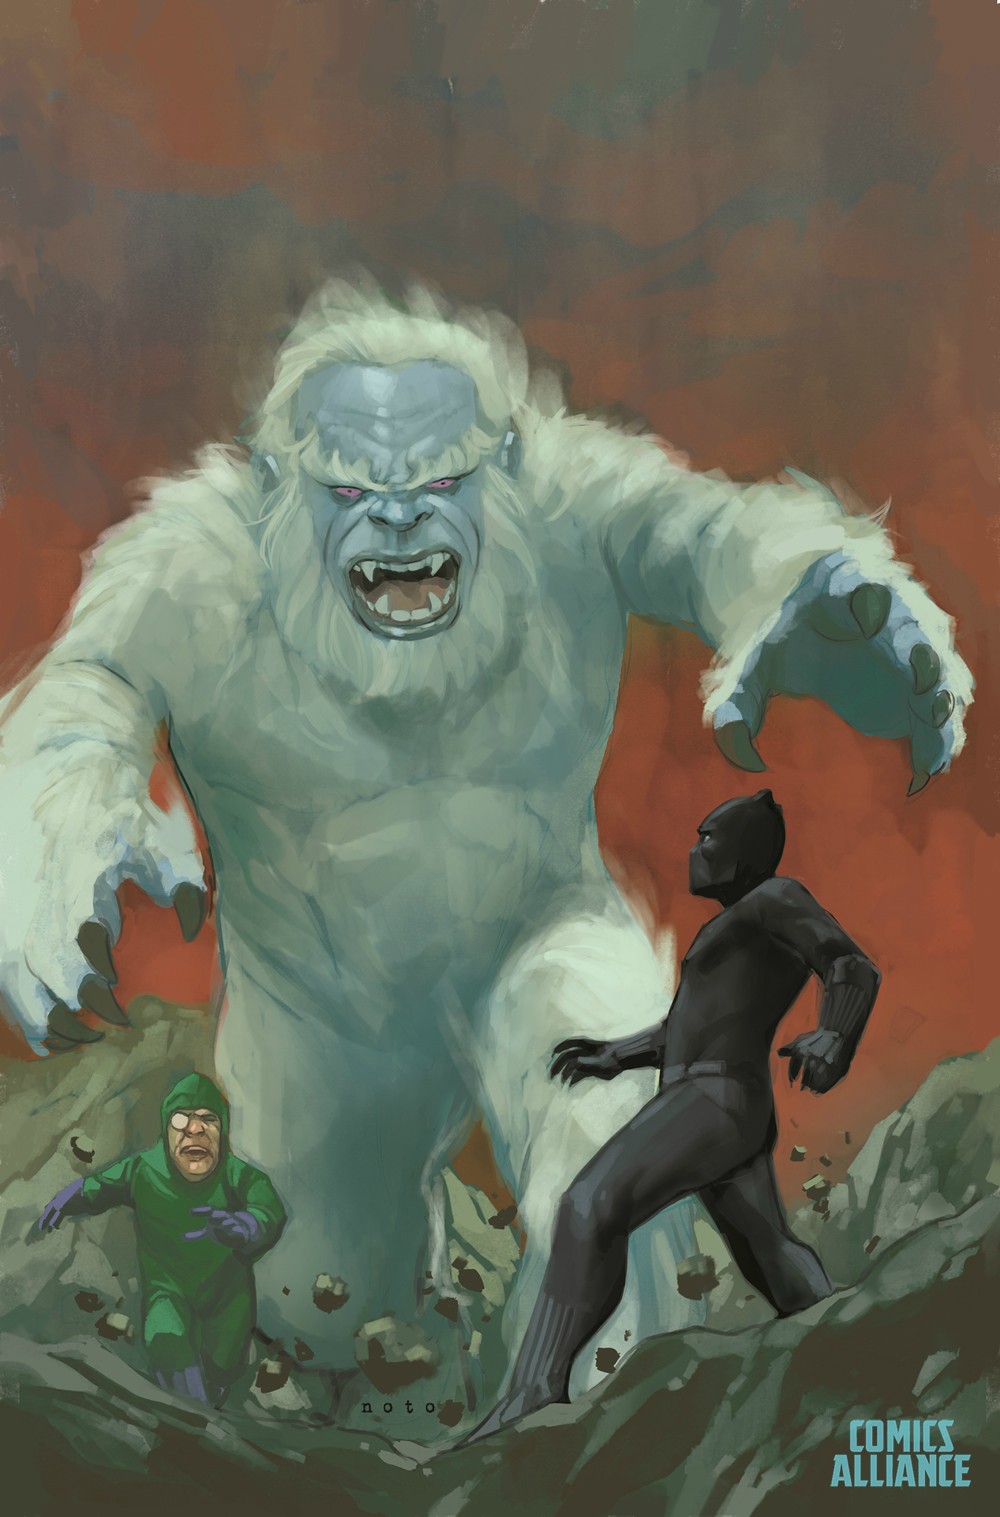 Extraordinary X-Men #2 featuring Yeti (from Black Panther #5). Cover by Phil Noto